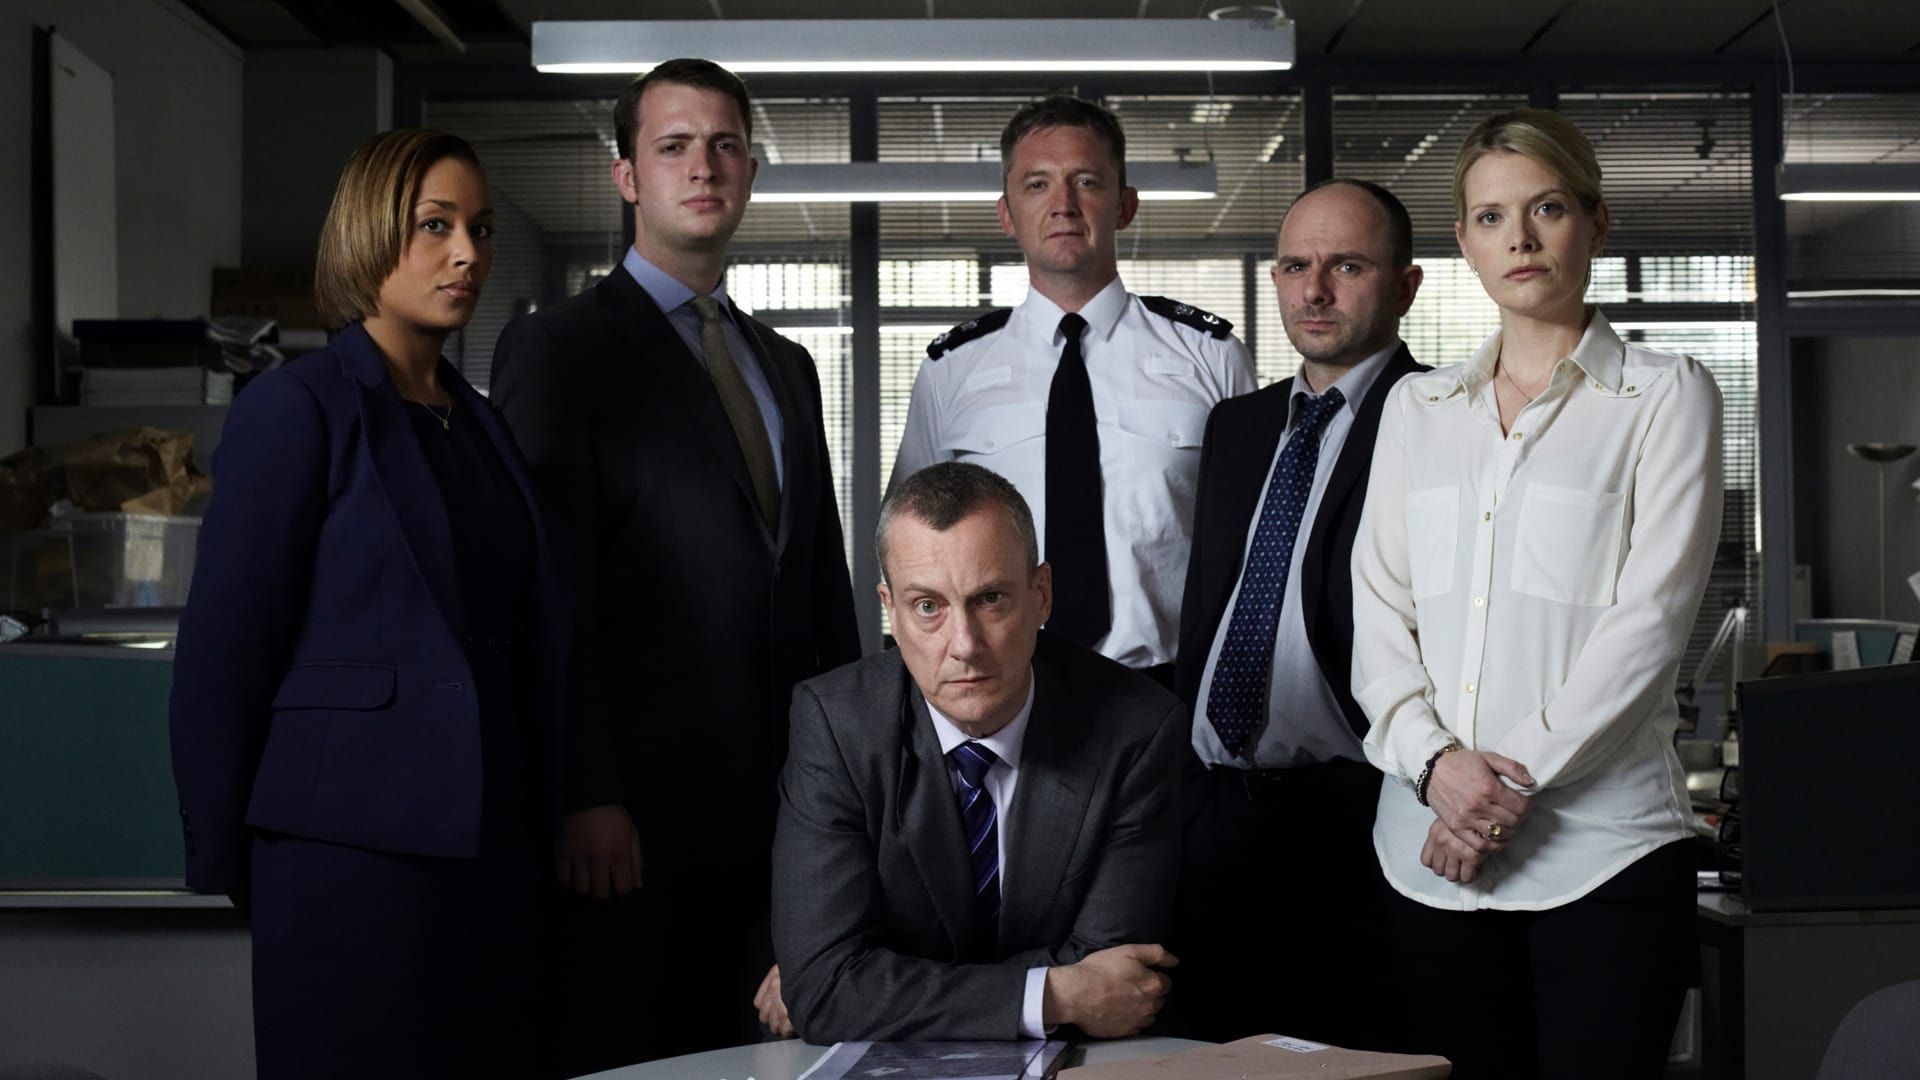 DCI Banks background